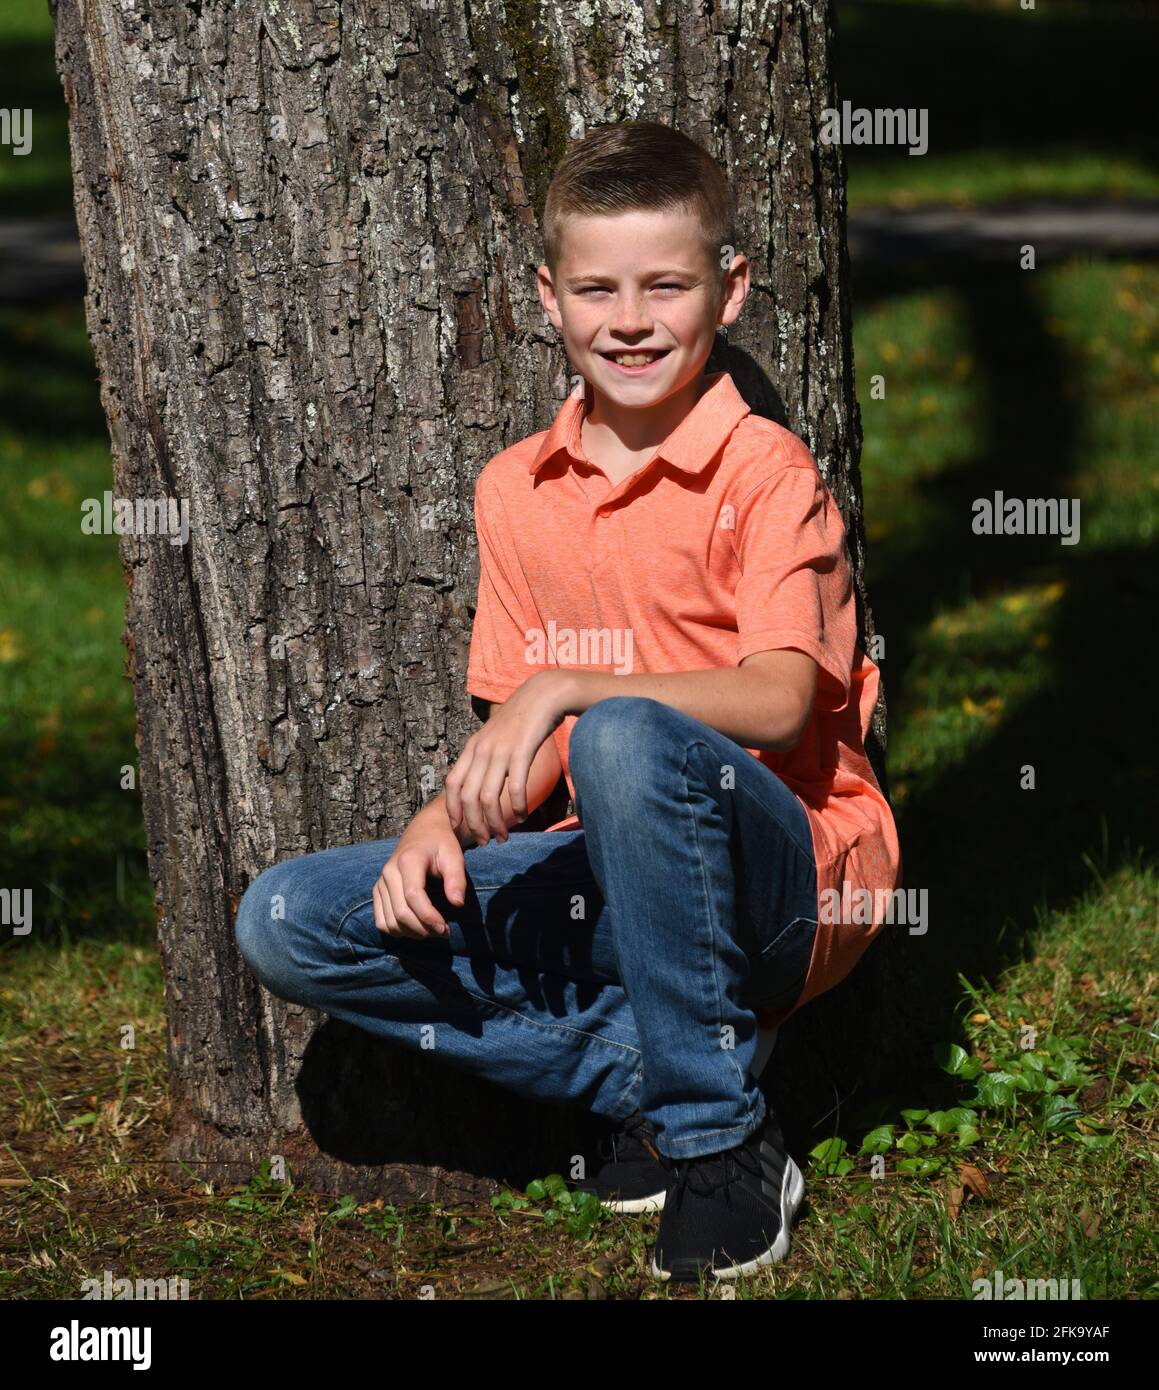 Young boy gives a boyish grin while kneeling besides a tree in morning  sunshine. He is wearing jeans and orange polo-style shirt Stock Photo -  Alamy